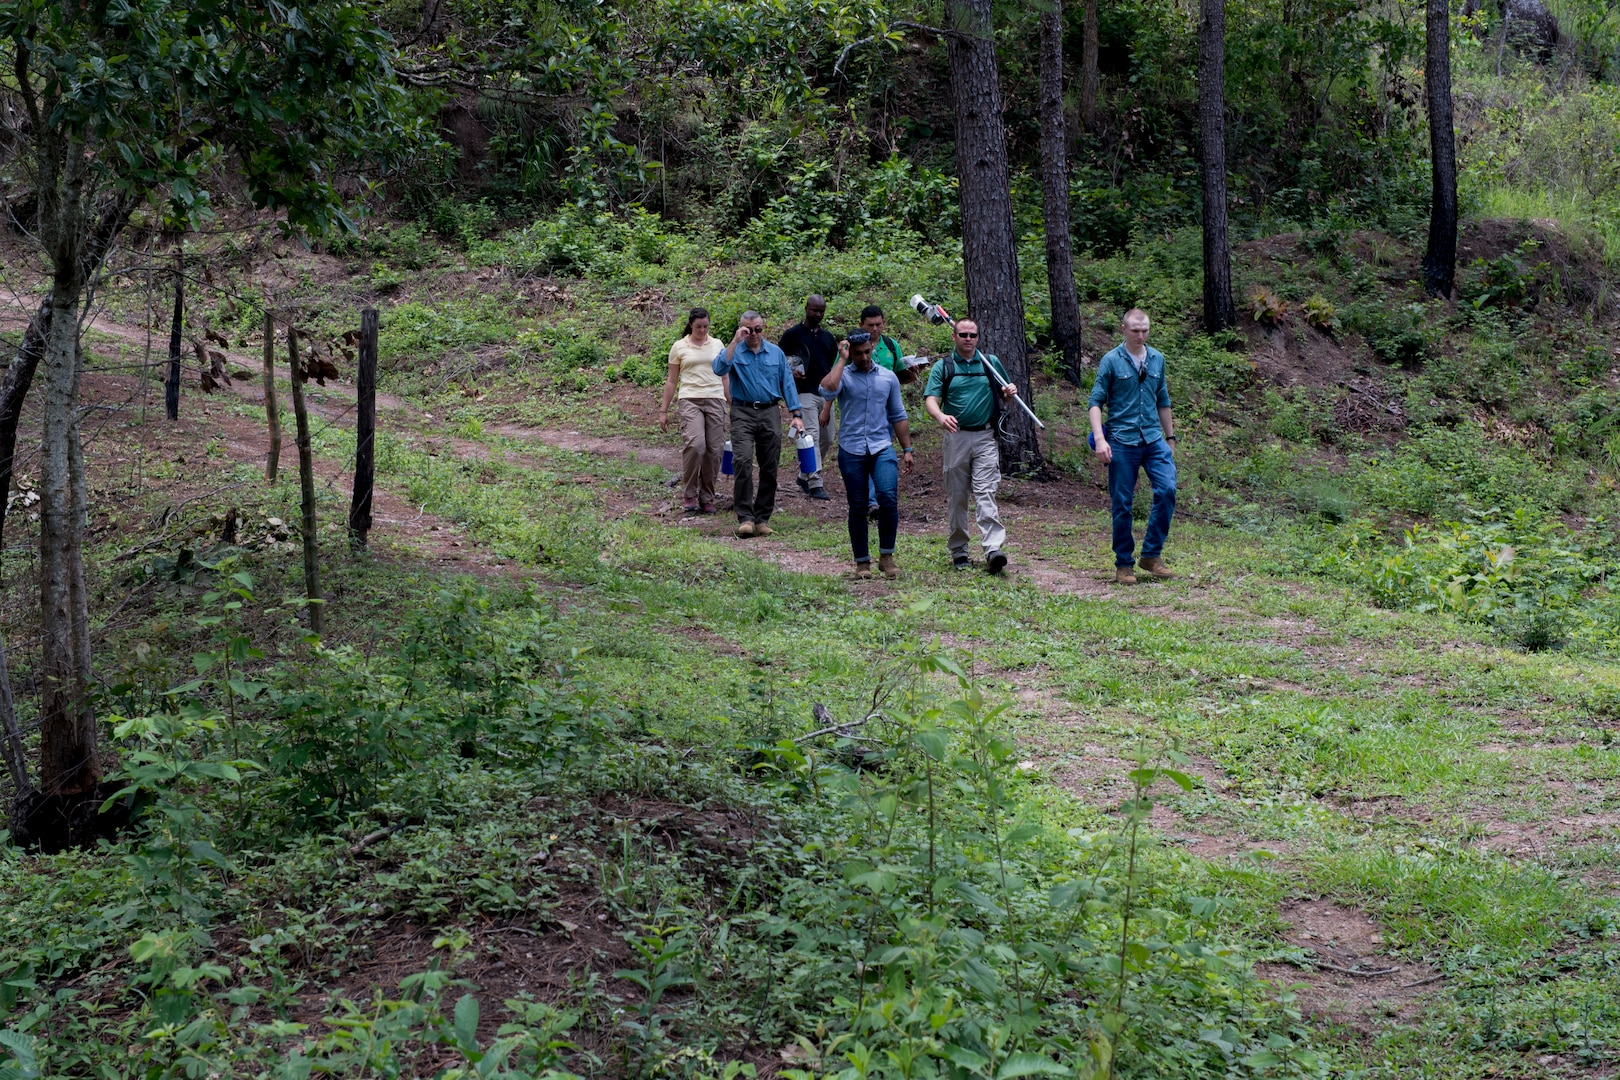 U.S. Army medical personnel traverse through mountains to visit homes of possible Leishamaniasis patients during an investigation July 9, 2019, at La Libertad, Honduras. Members of JTF-B were asked by the Honduran Ministry of Health to conduct an investigation into the cause of Leishmaniasis and provide any recommendations that may stop infection. Leishmaniasis is a parasitic disease that is caused by infection with leishmania parasites, which are spread through the bite of sand flies. (U.S. Air Force photo by Staff Sgt. Eric Summers Jr.)